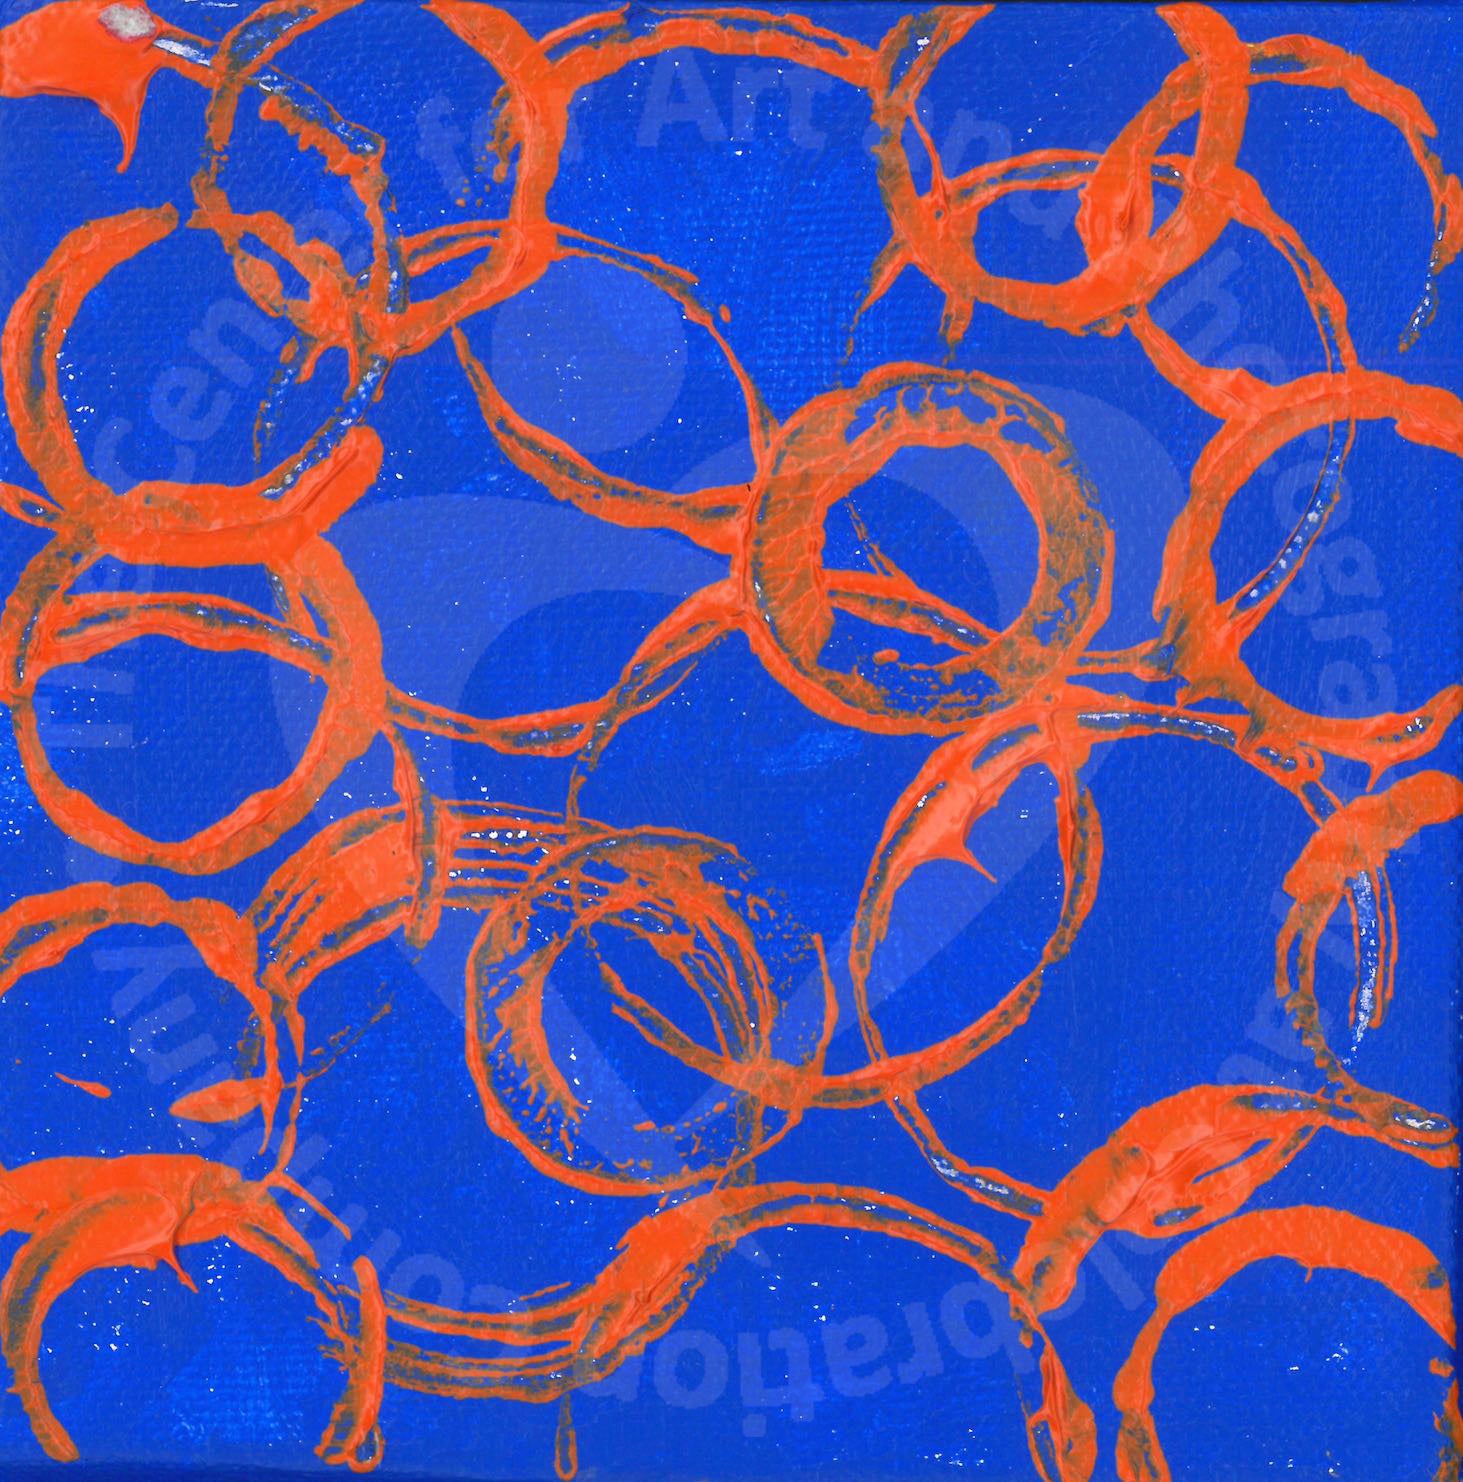 Bright orange circle impressions overlapping against a bright blue background